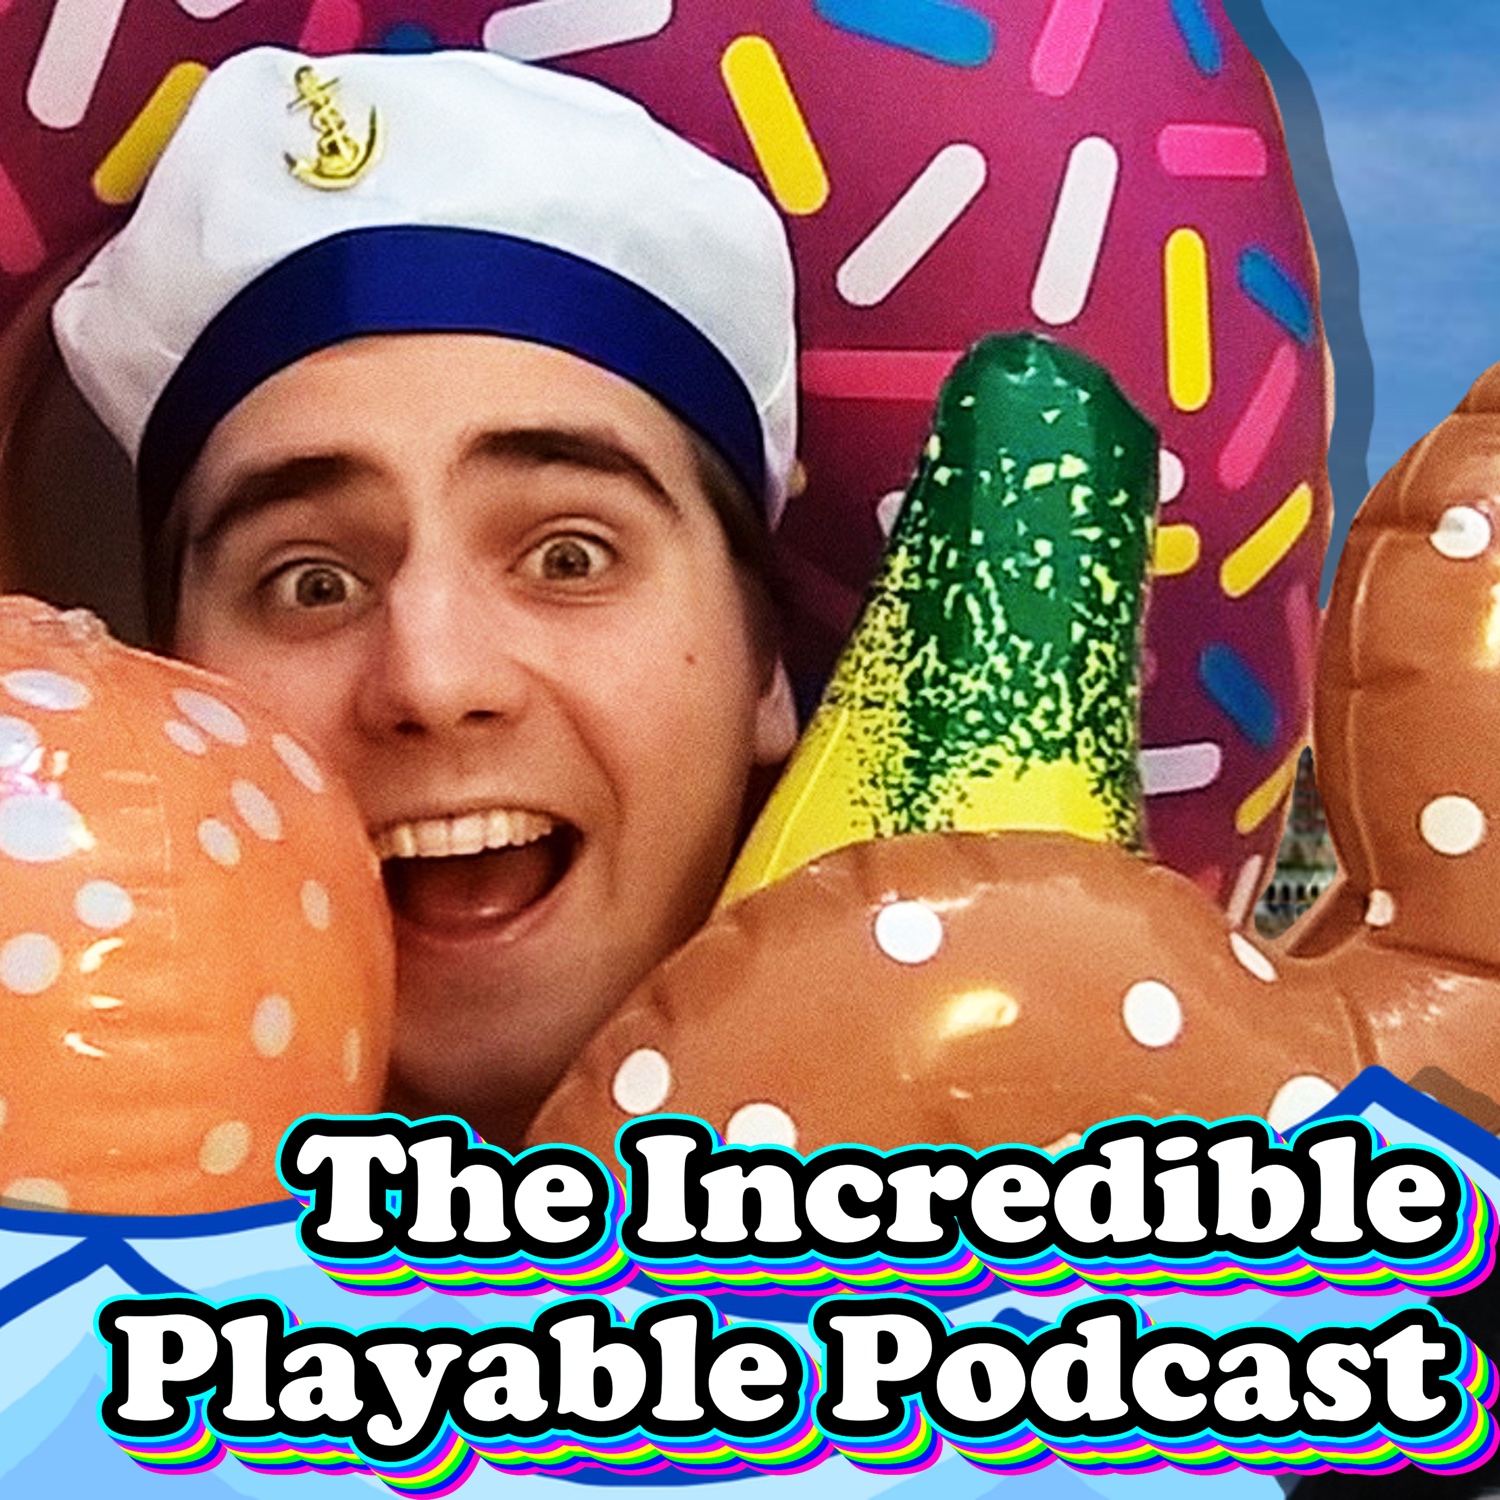 The Incredible Playable Podcast